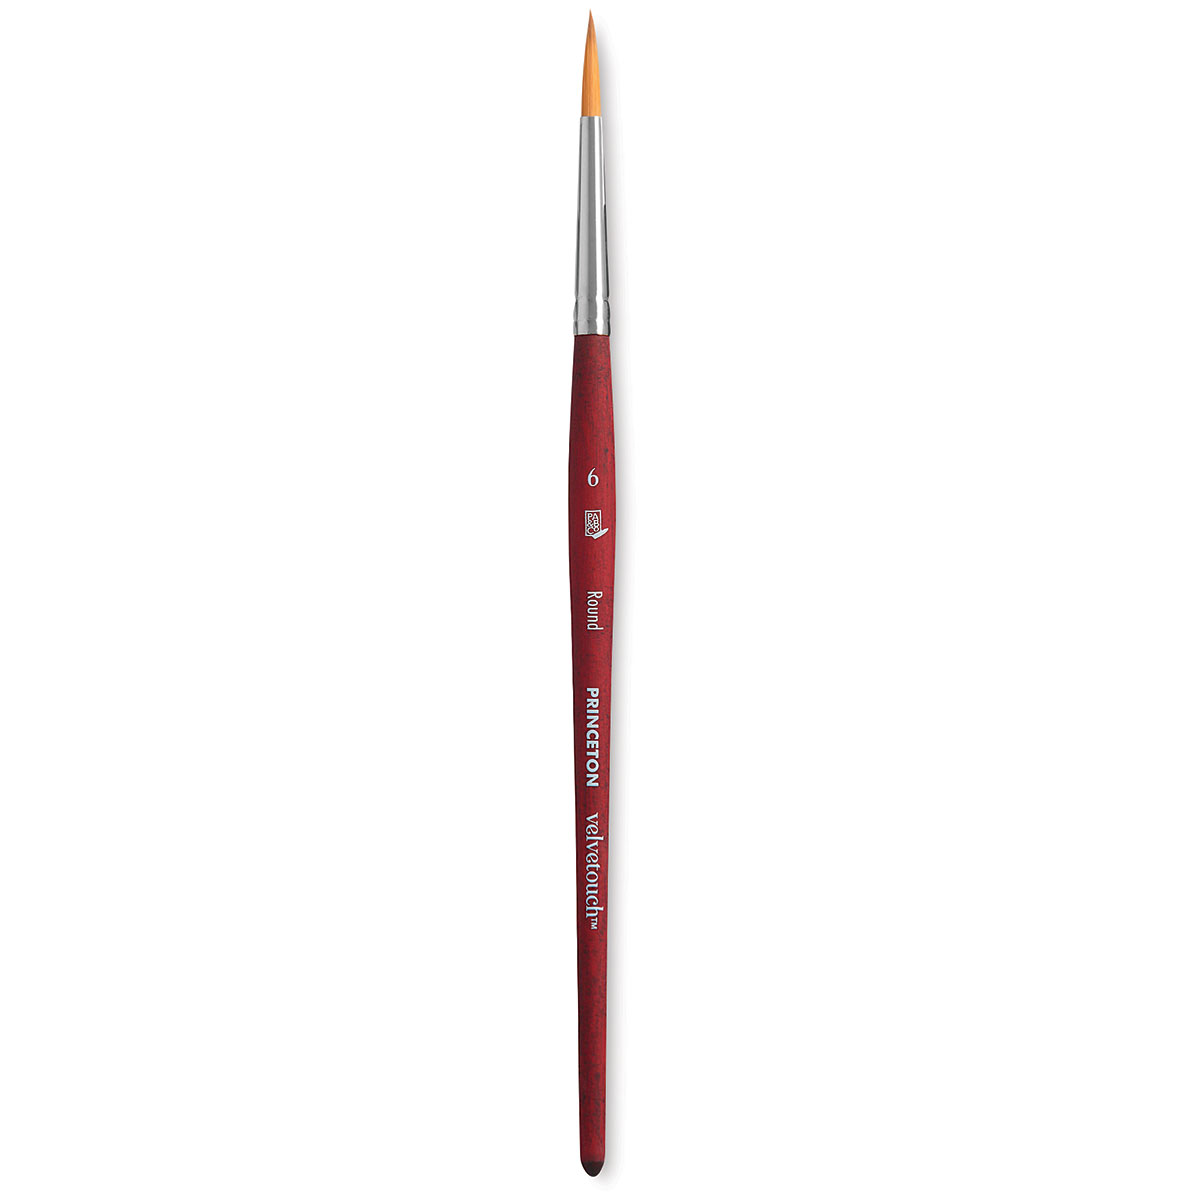 Princeton Velvetouch™ Series 3950 Synthetic Blend Brushes